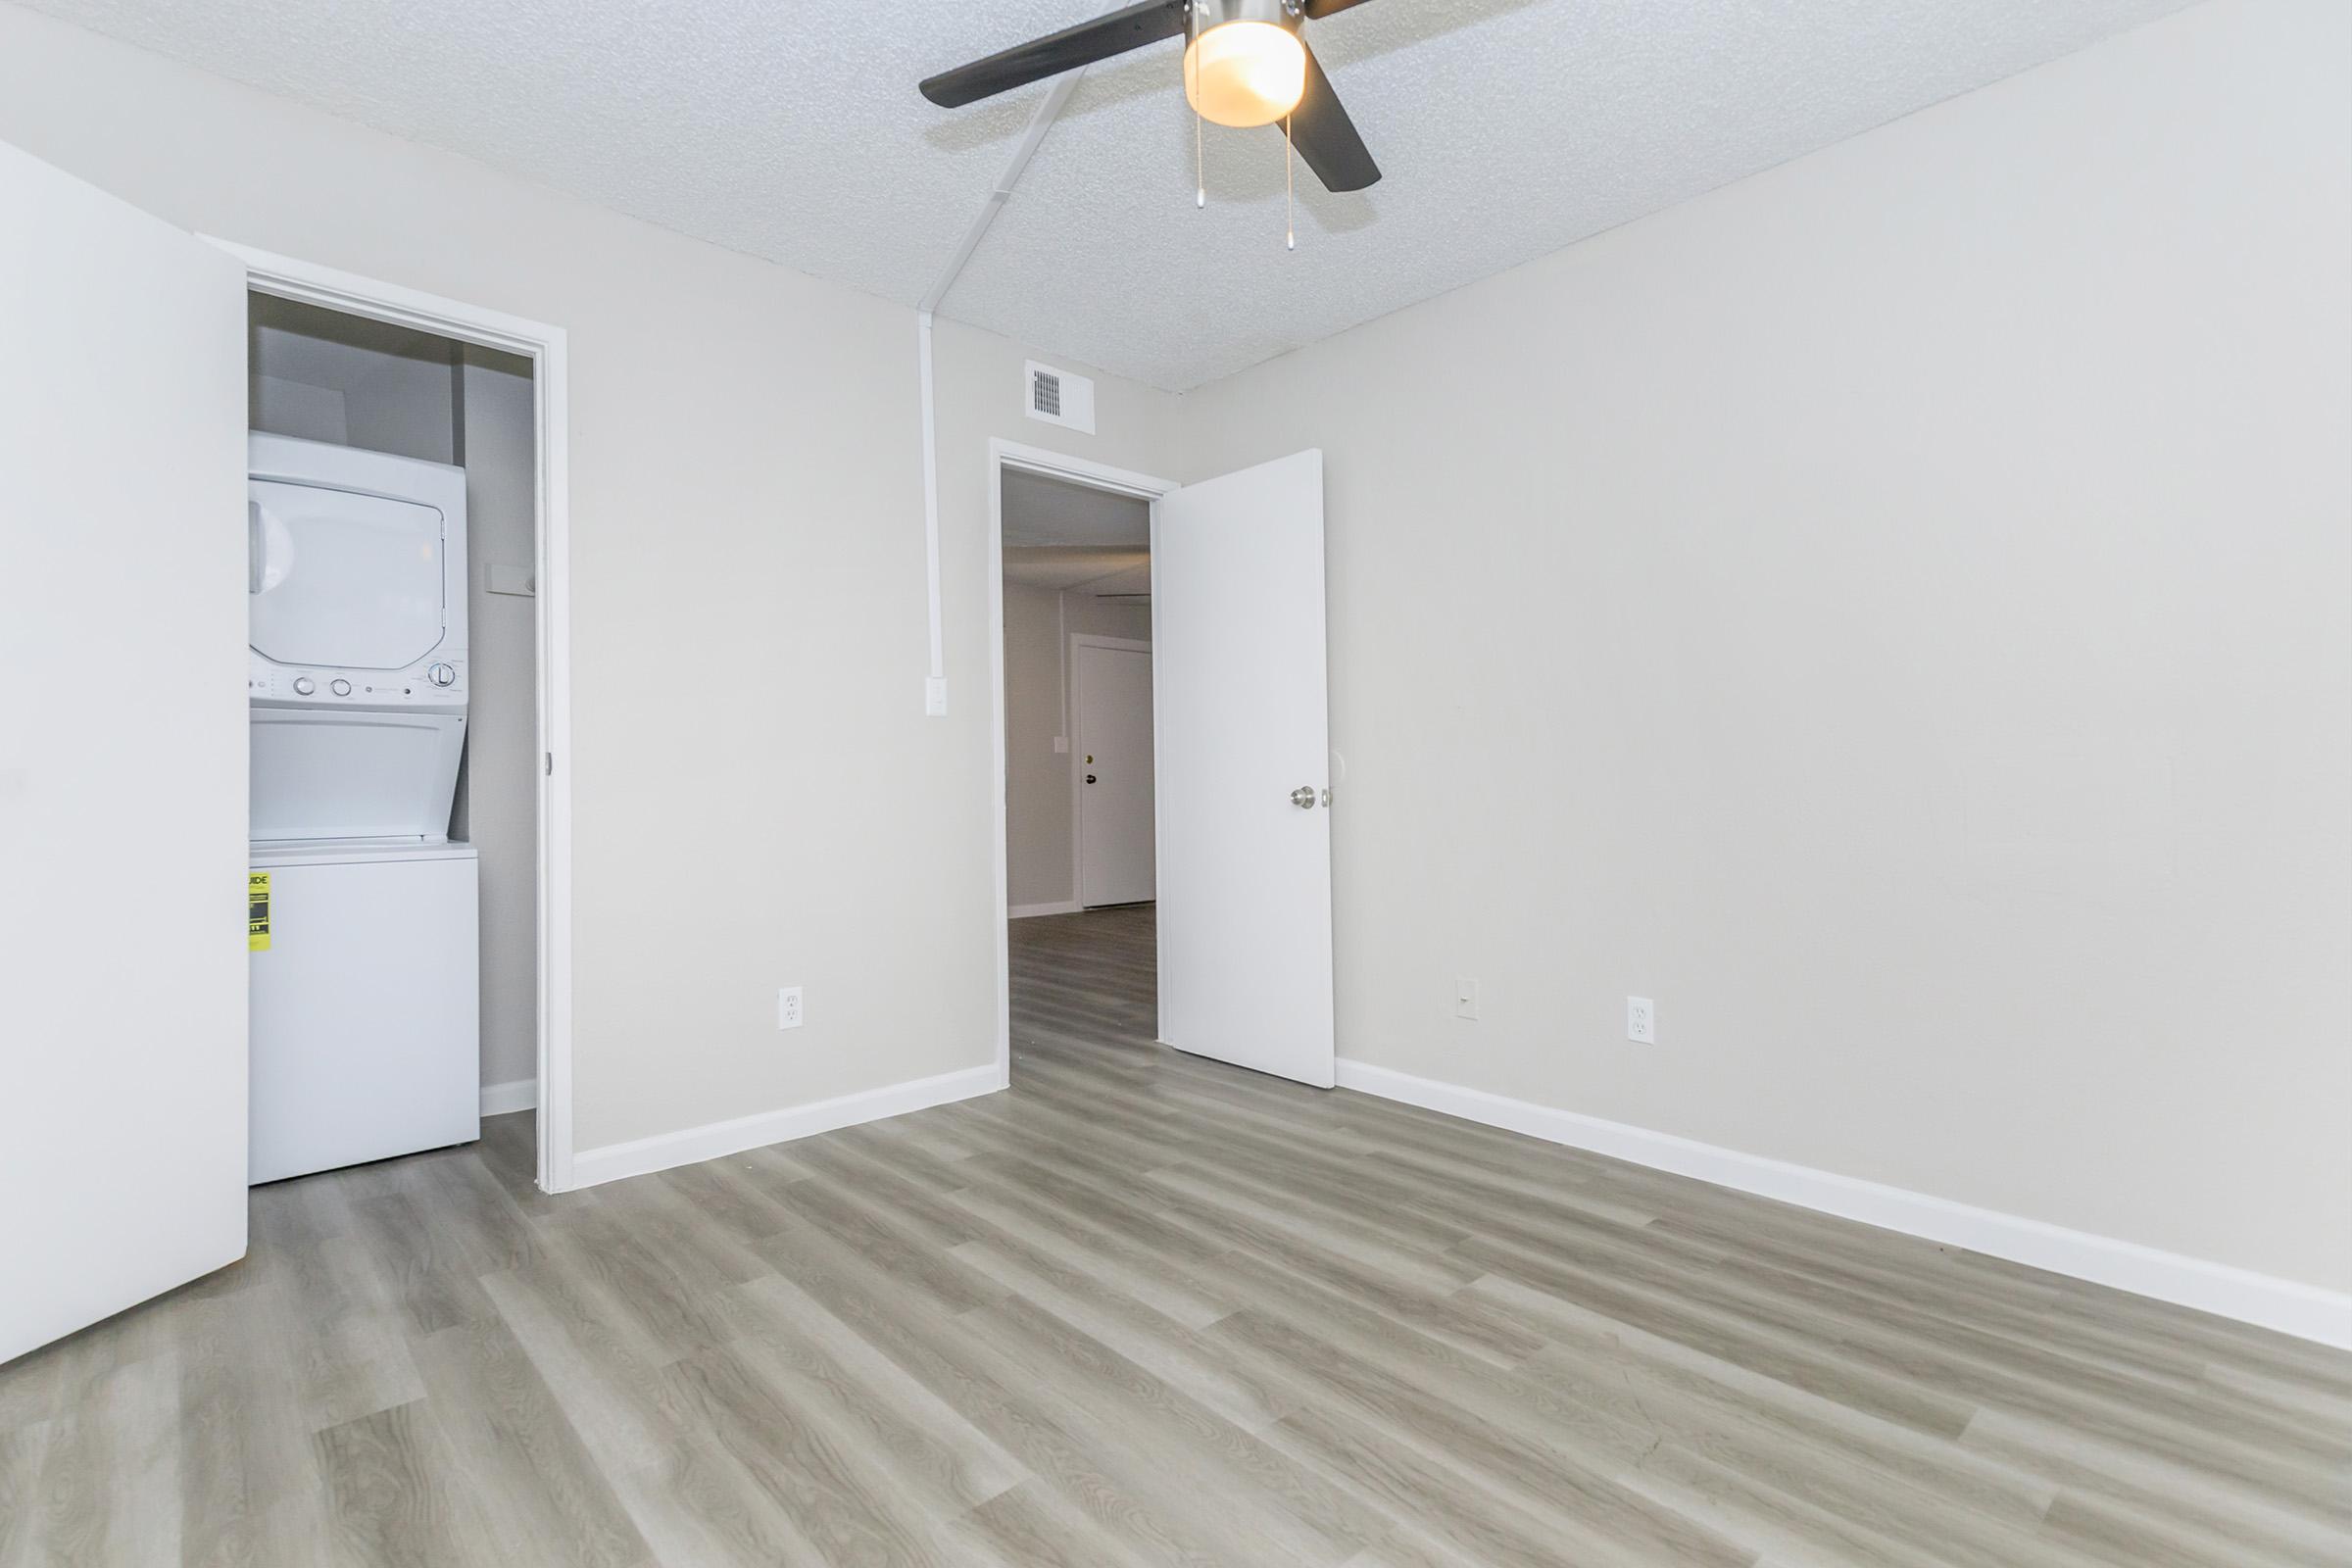 Spacious renovated bedroom with ceiling fan and washer and dryer in closet